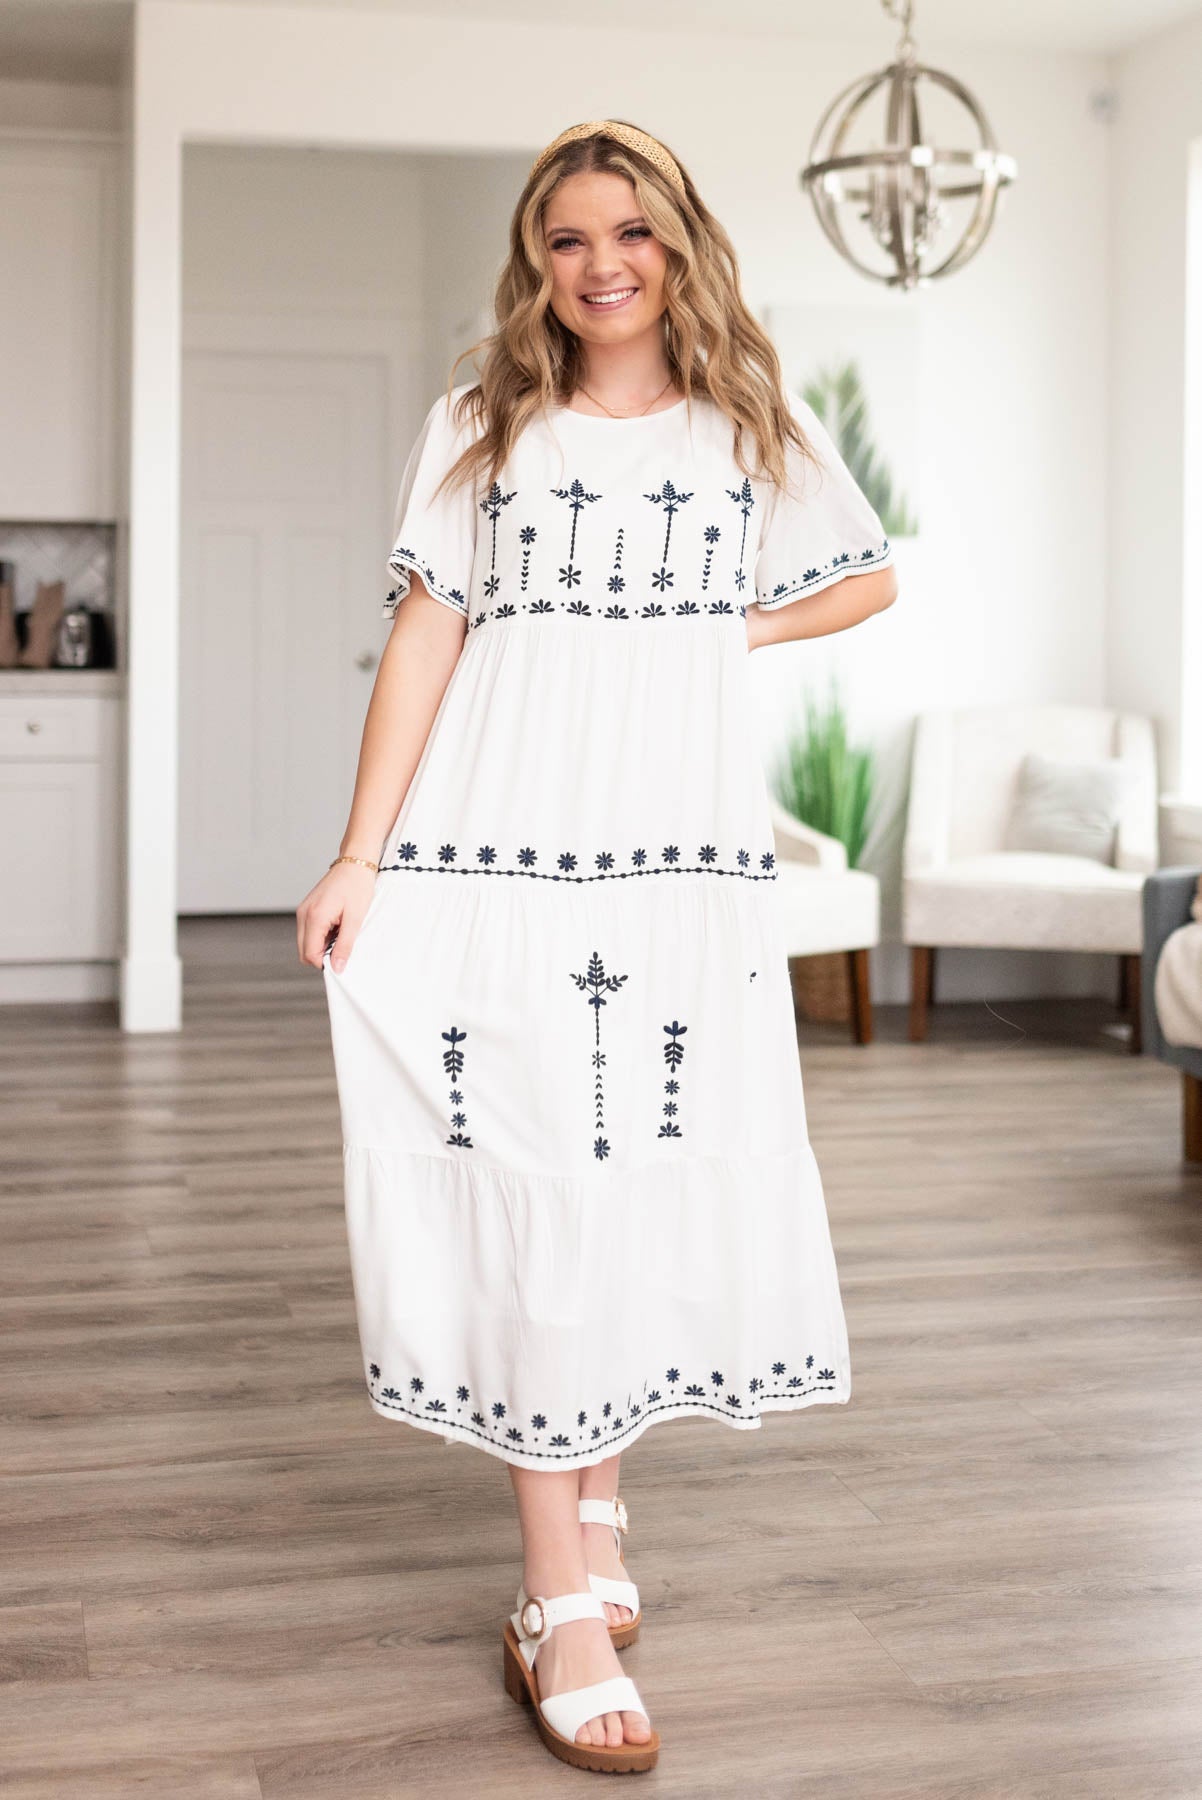 White embroidered dress with navy embroidered pattern